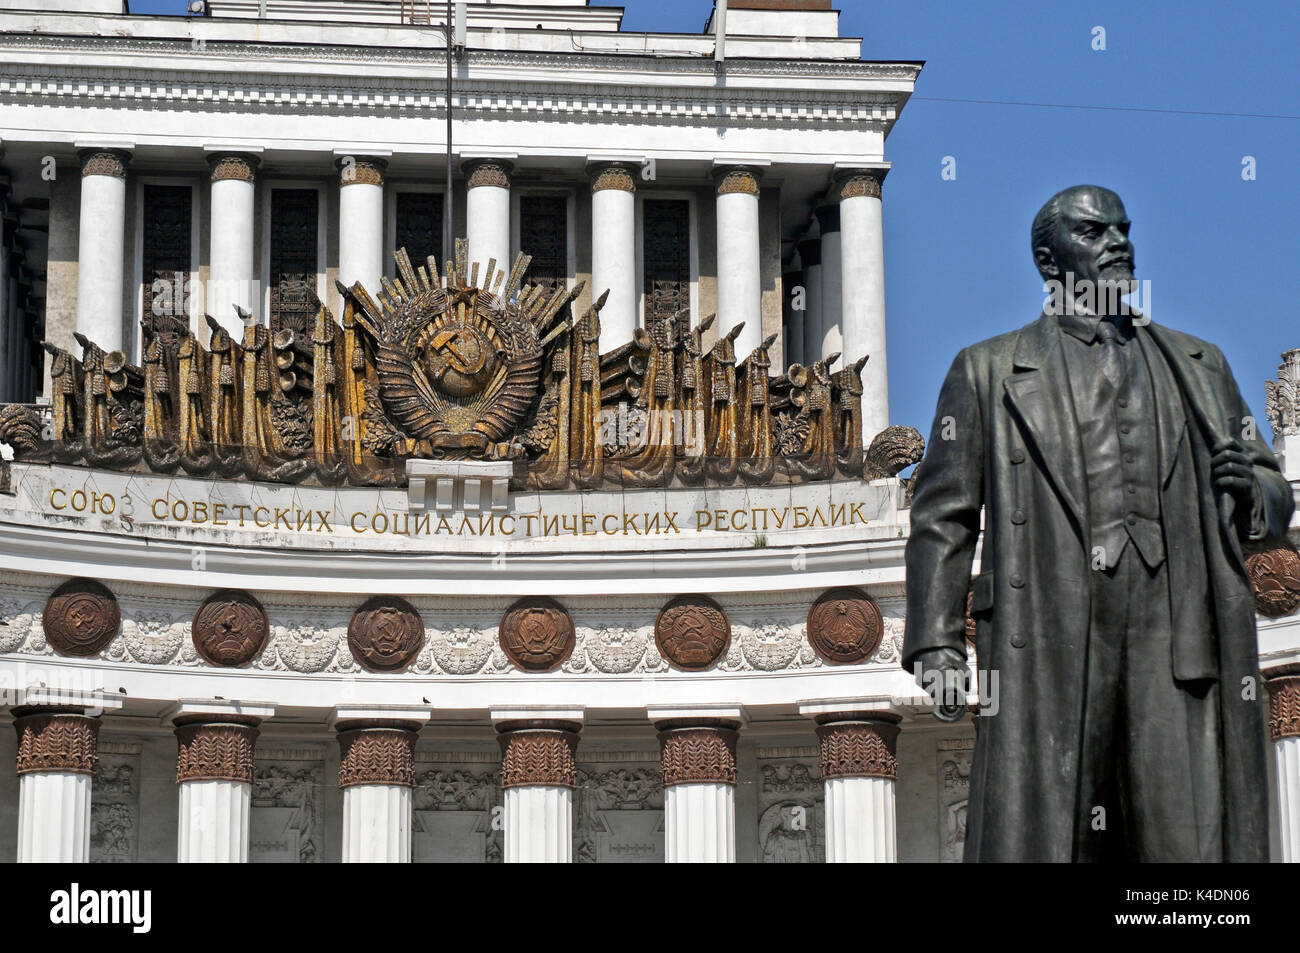 VDNH: Lenin Statue, in front of the Central Pavilion (House of Russian People - Dom Narodov Rossii). Moscow, Russia Stock Photo